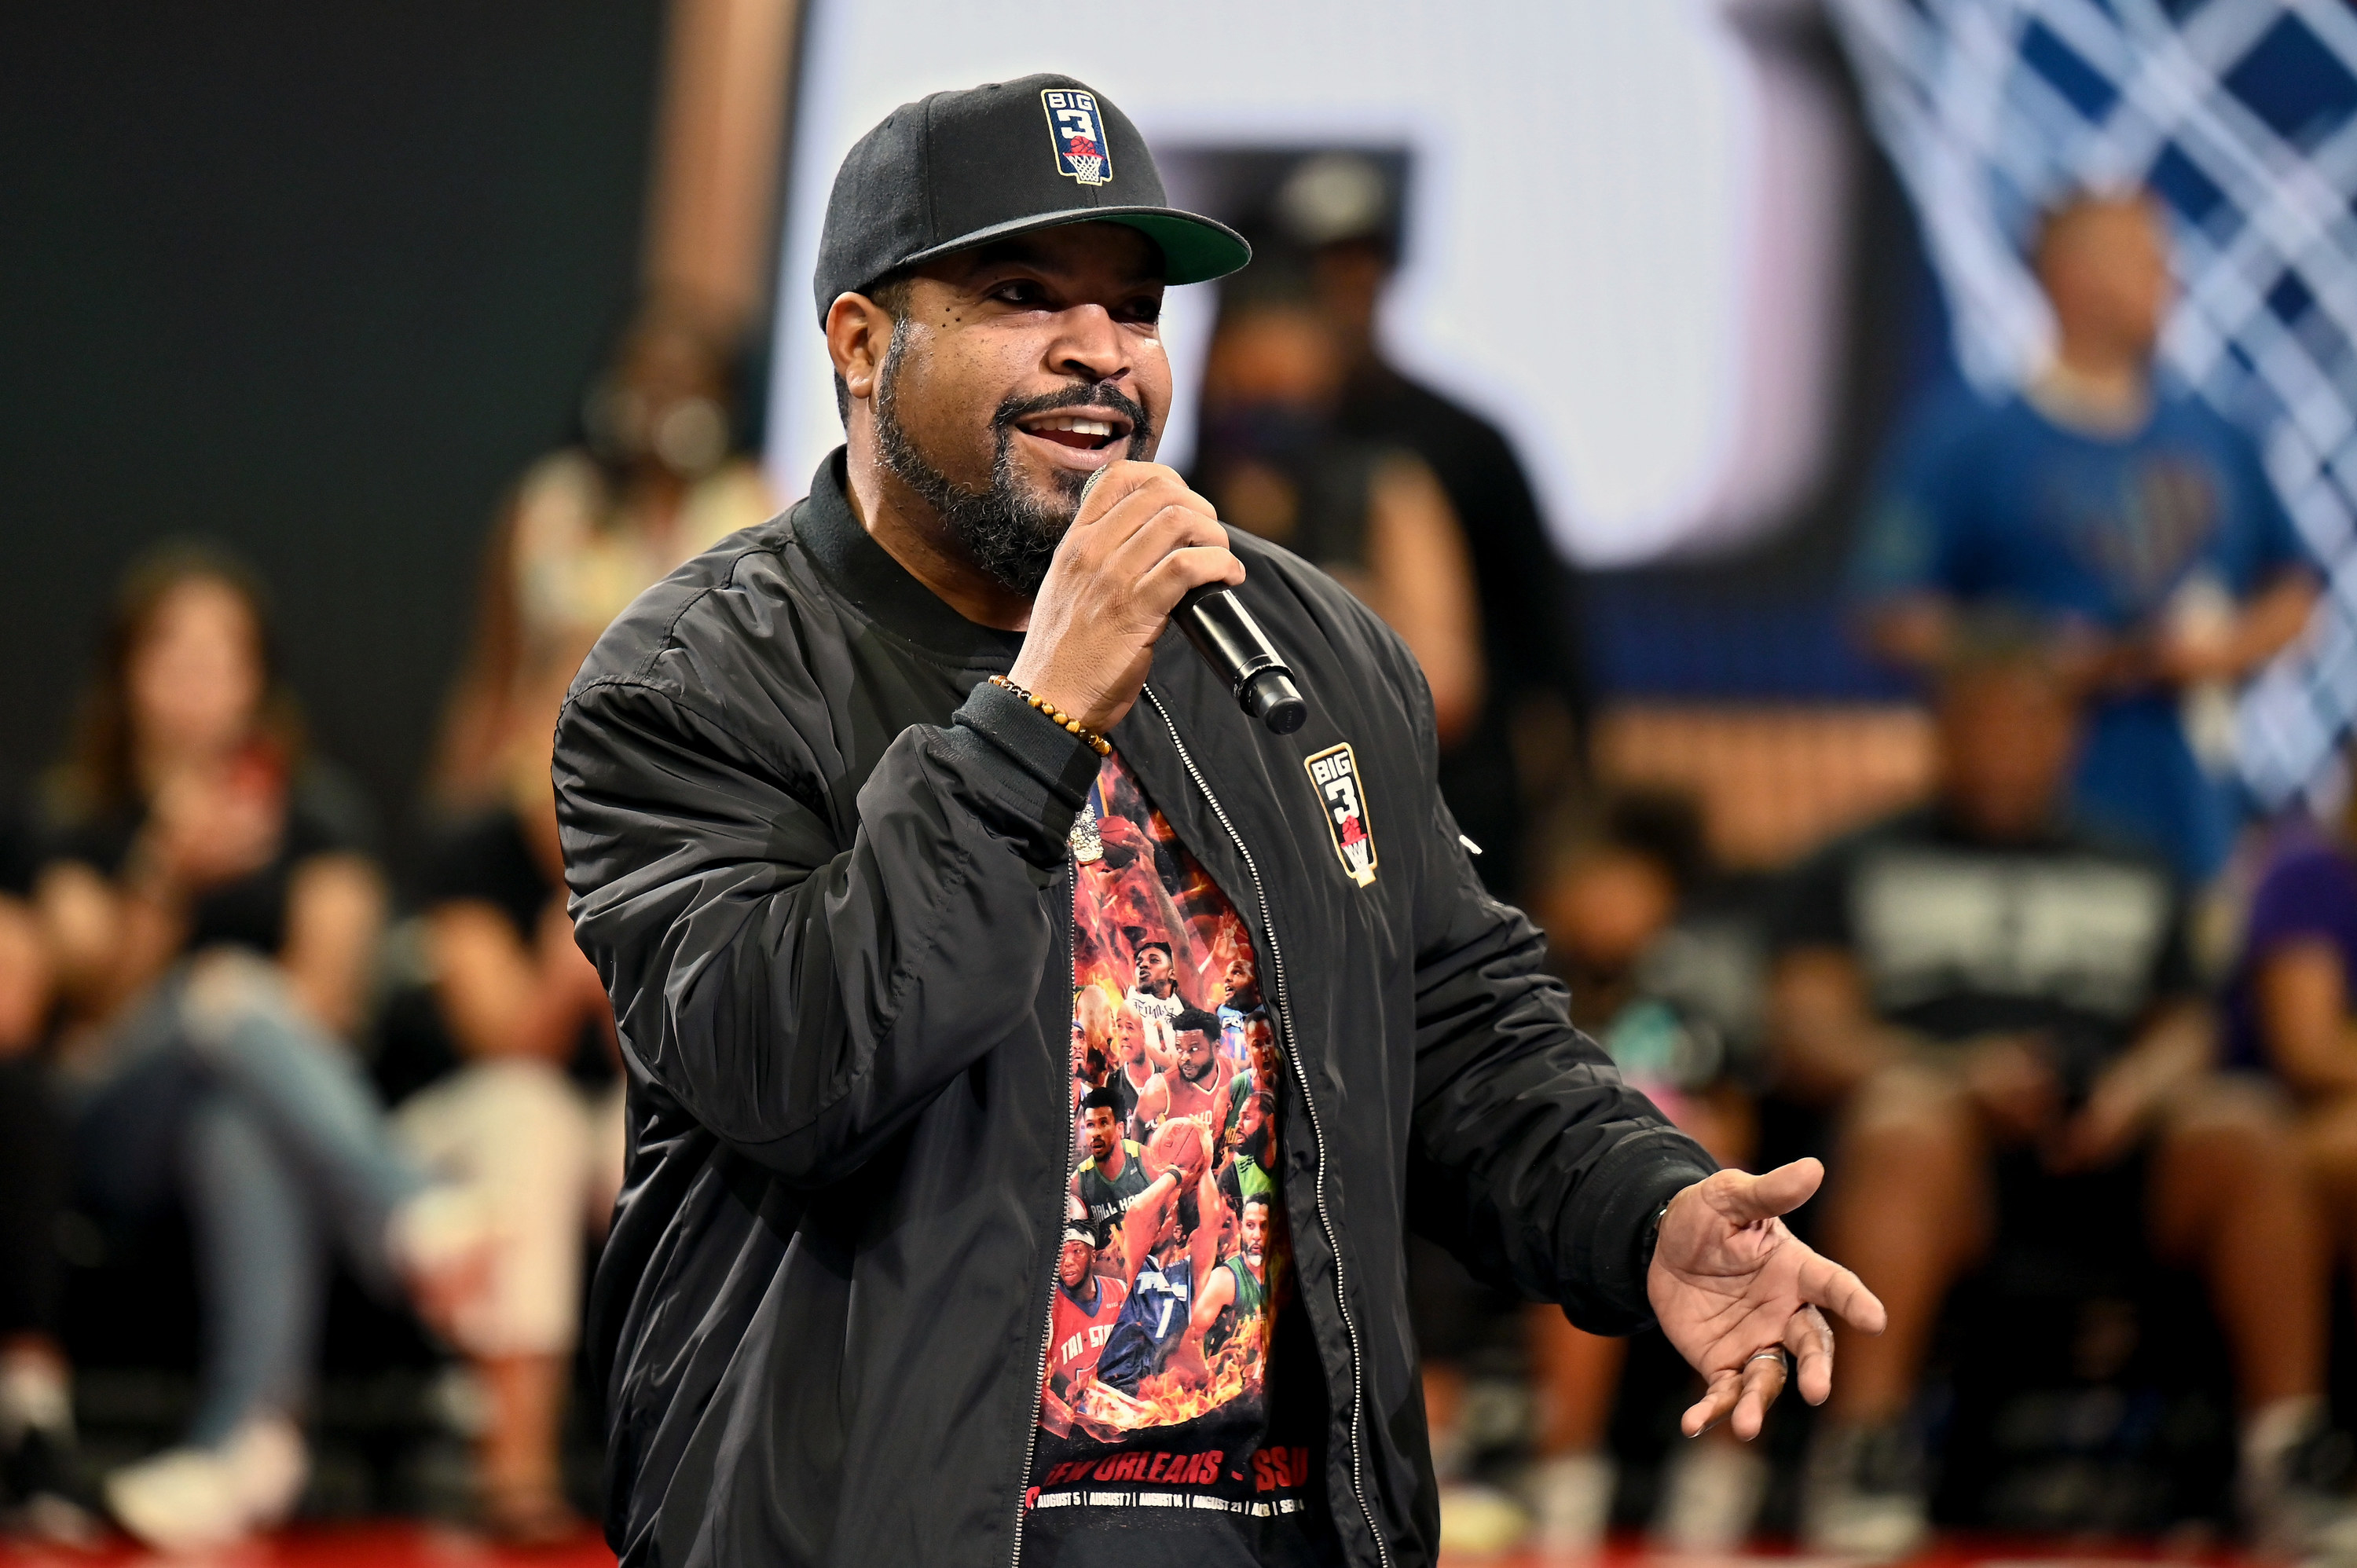 Ice Cube at an event